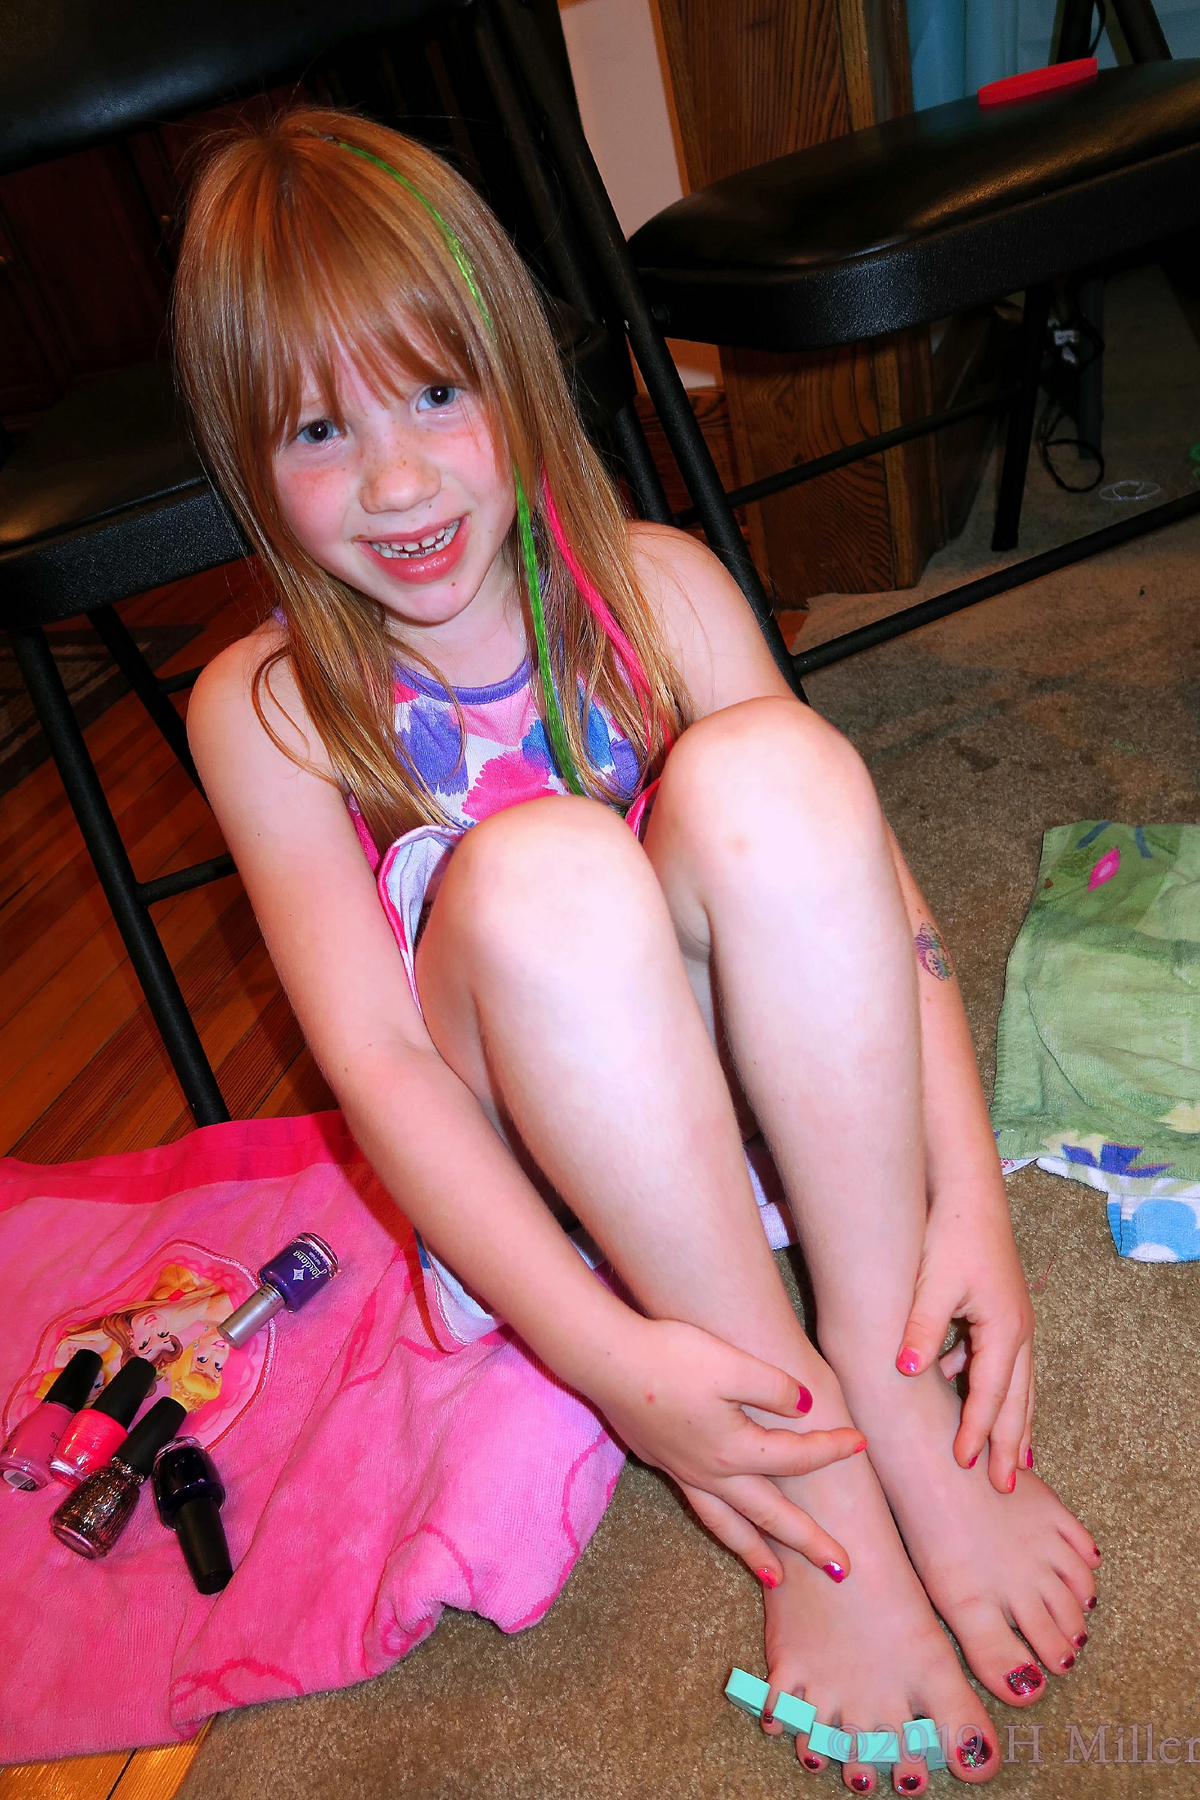 Posing With Pedis And Manis Take Two! Kids Manicure And Pedicure On Party Guest! 1